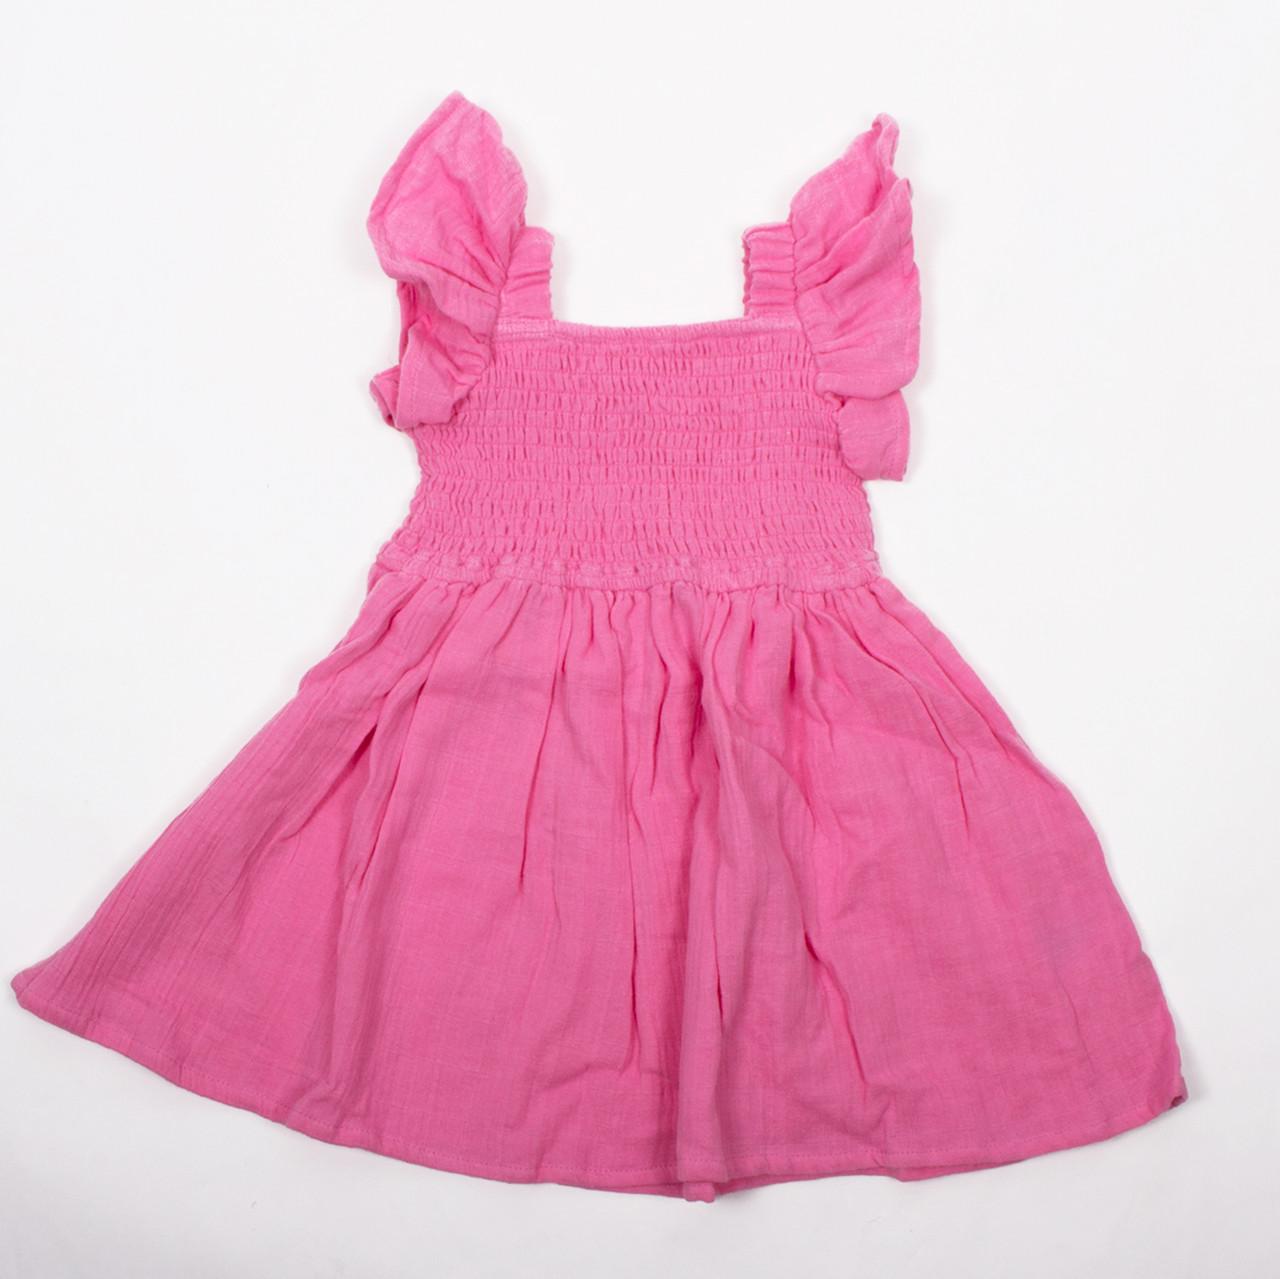 Smocked Cover Up Dress Girls 3-14 Pink - Shade Critters